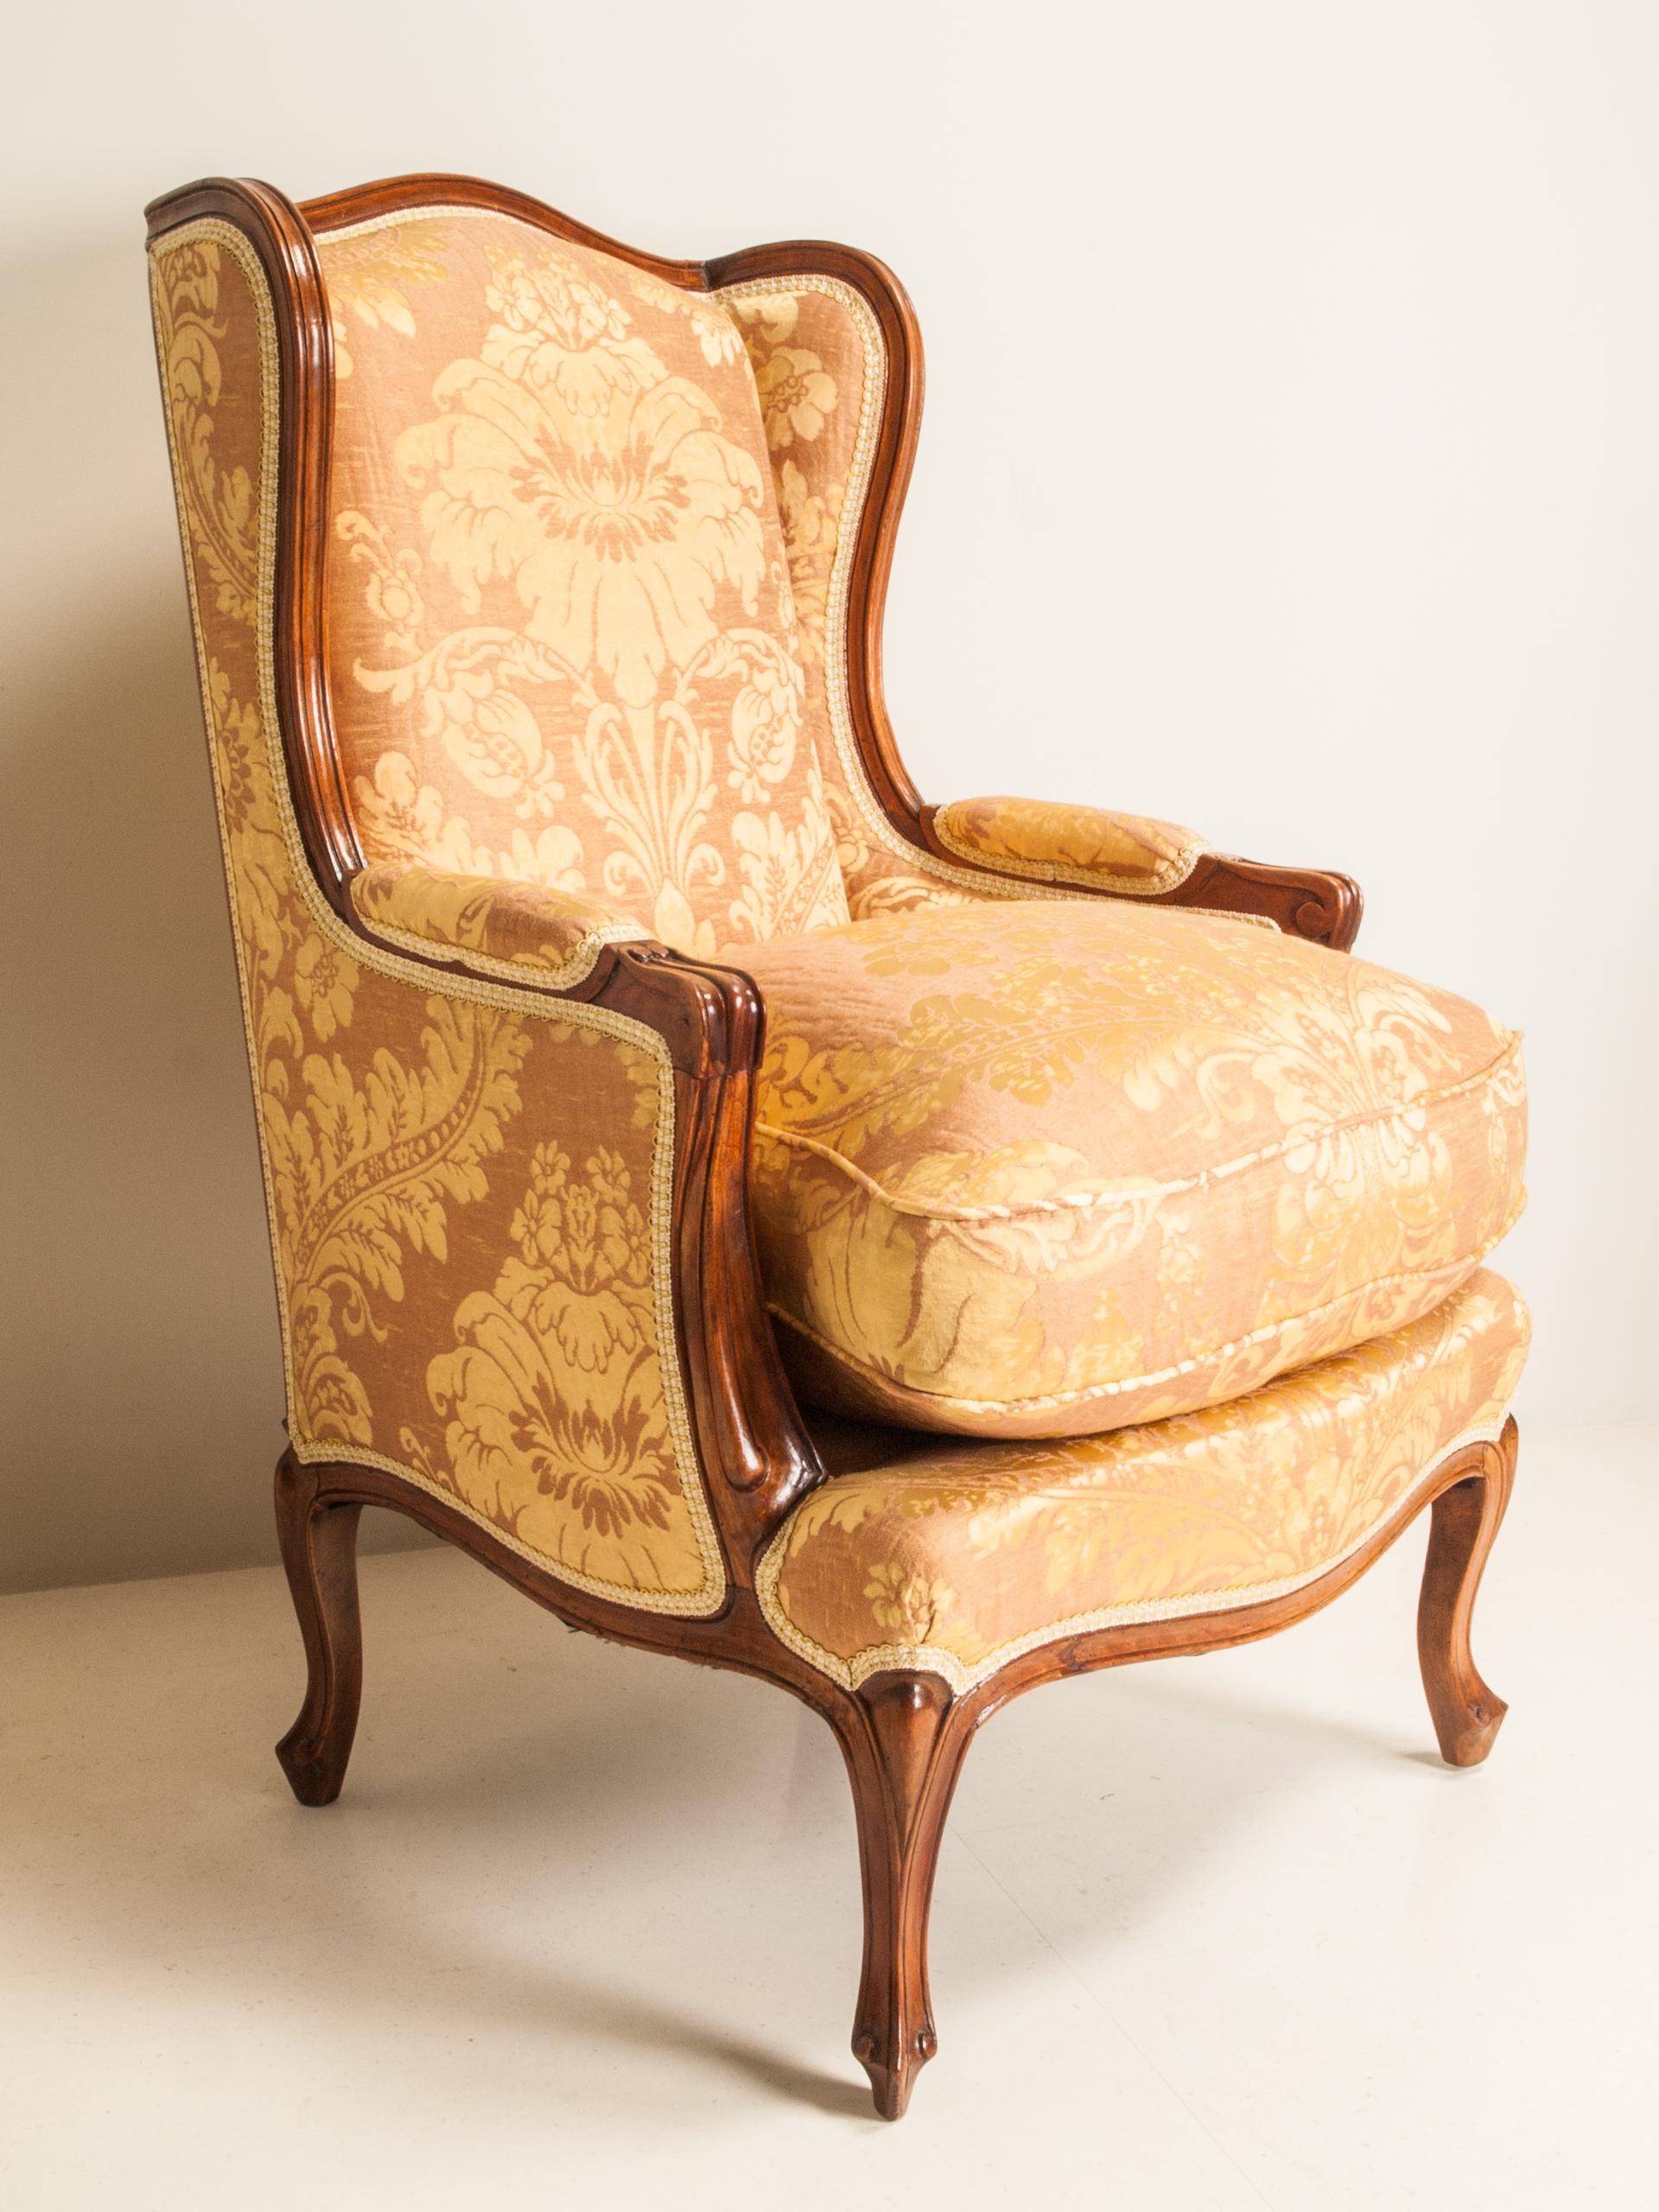 Elegant shape and very comfortable sitting - this is their characteristic. They are made of solid walnut, their cabriole legs are on the end nicely scrolled. Upholstered in Venetian silk brocade. Goose feathers cushioned seats enable great comfort.